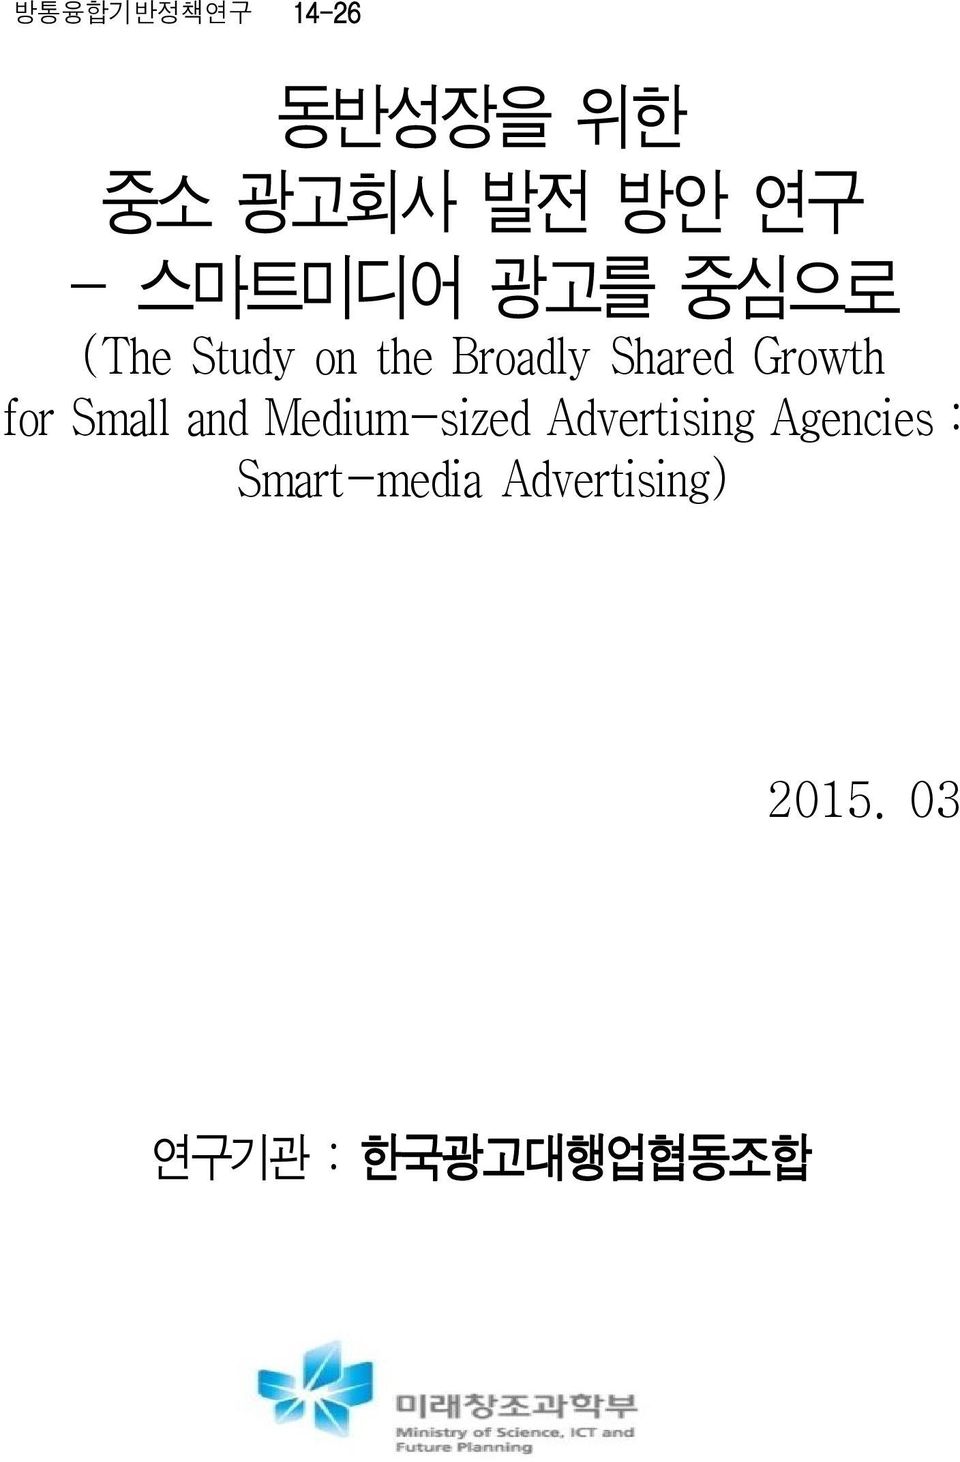 Growth for Small and Medium-sized Advertising